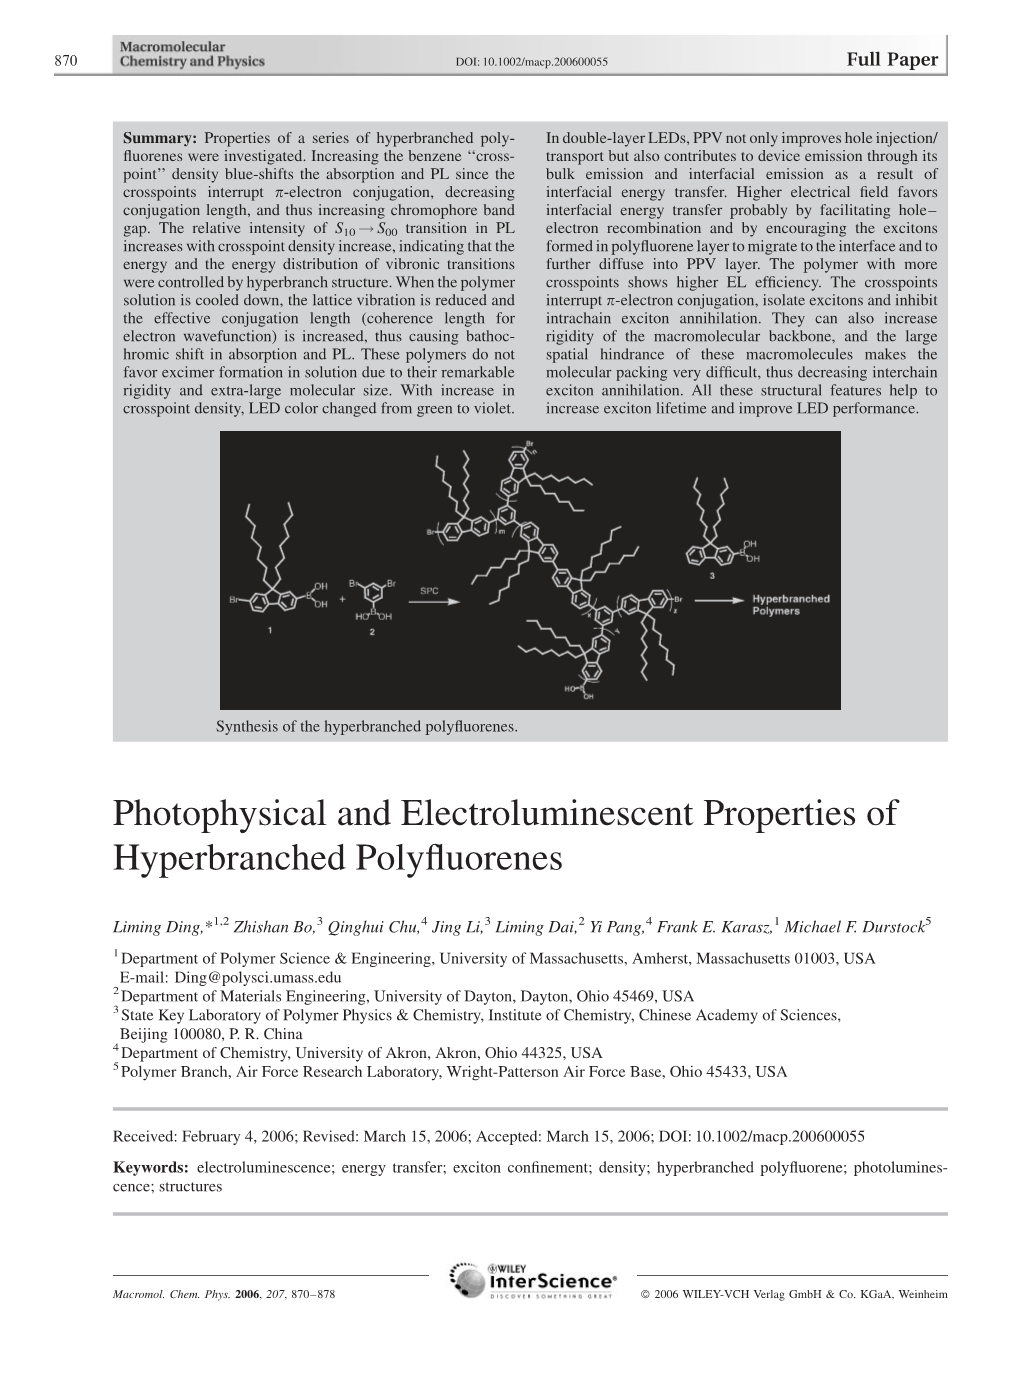 Photophysical and Electroluminescent Properties of Hyperbranched Polyfluorenes